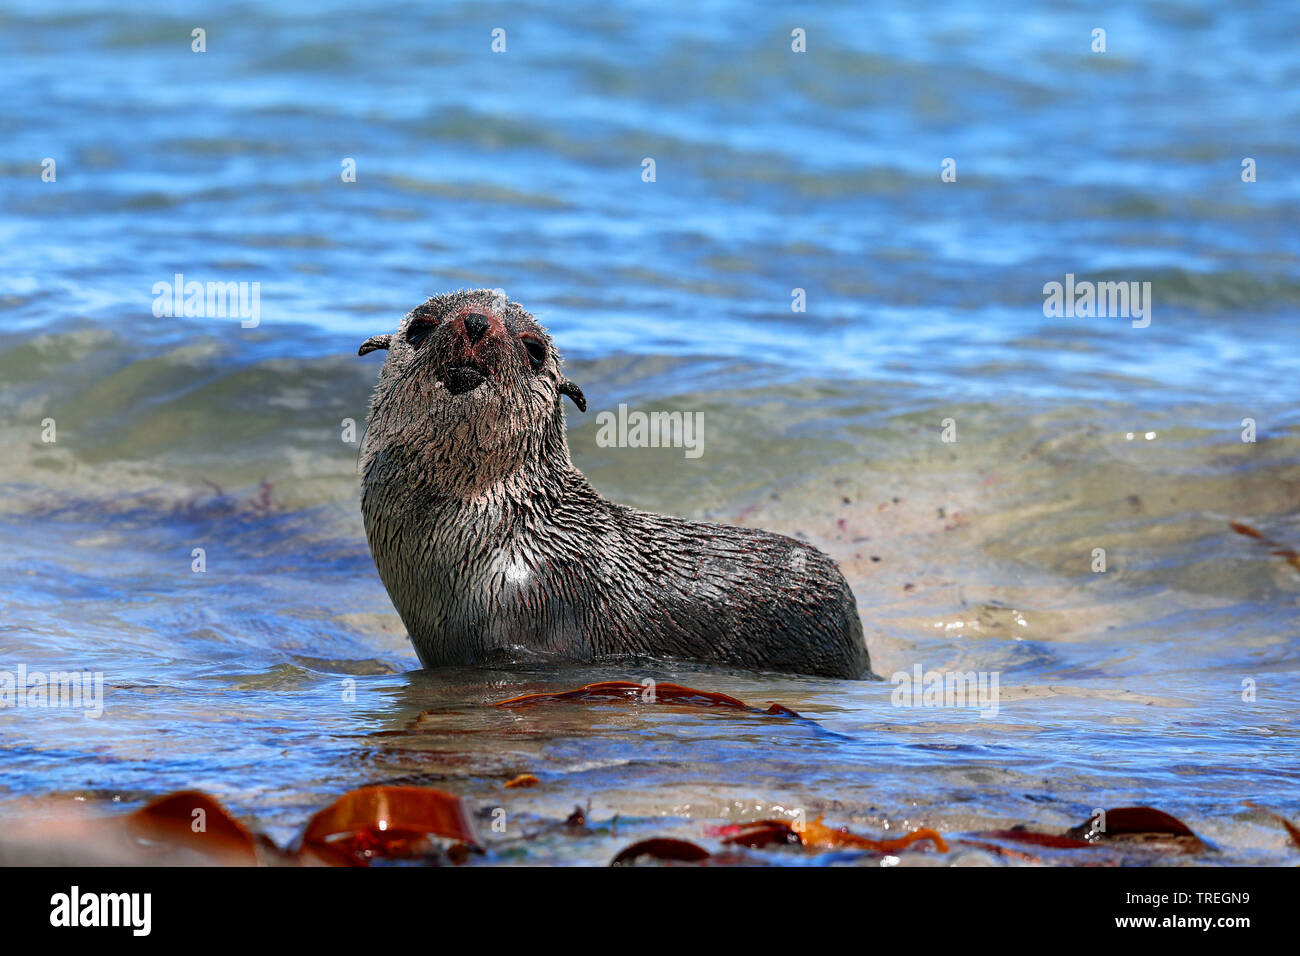 African clawless otter (Aonyx capensis), in water at shore, South Africa, Western Cape, Cape of Good Hope National Park Stock Photo